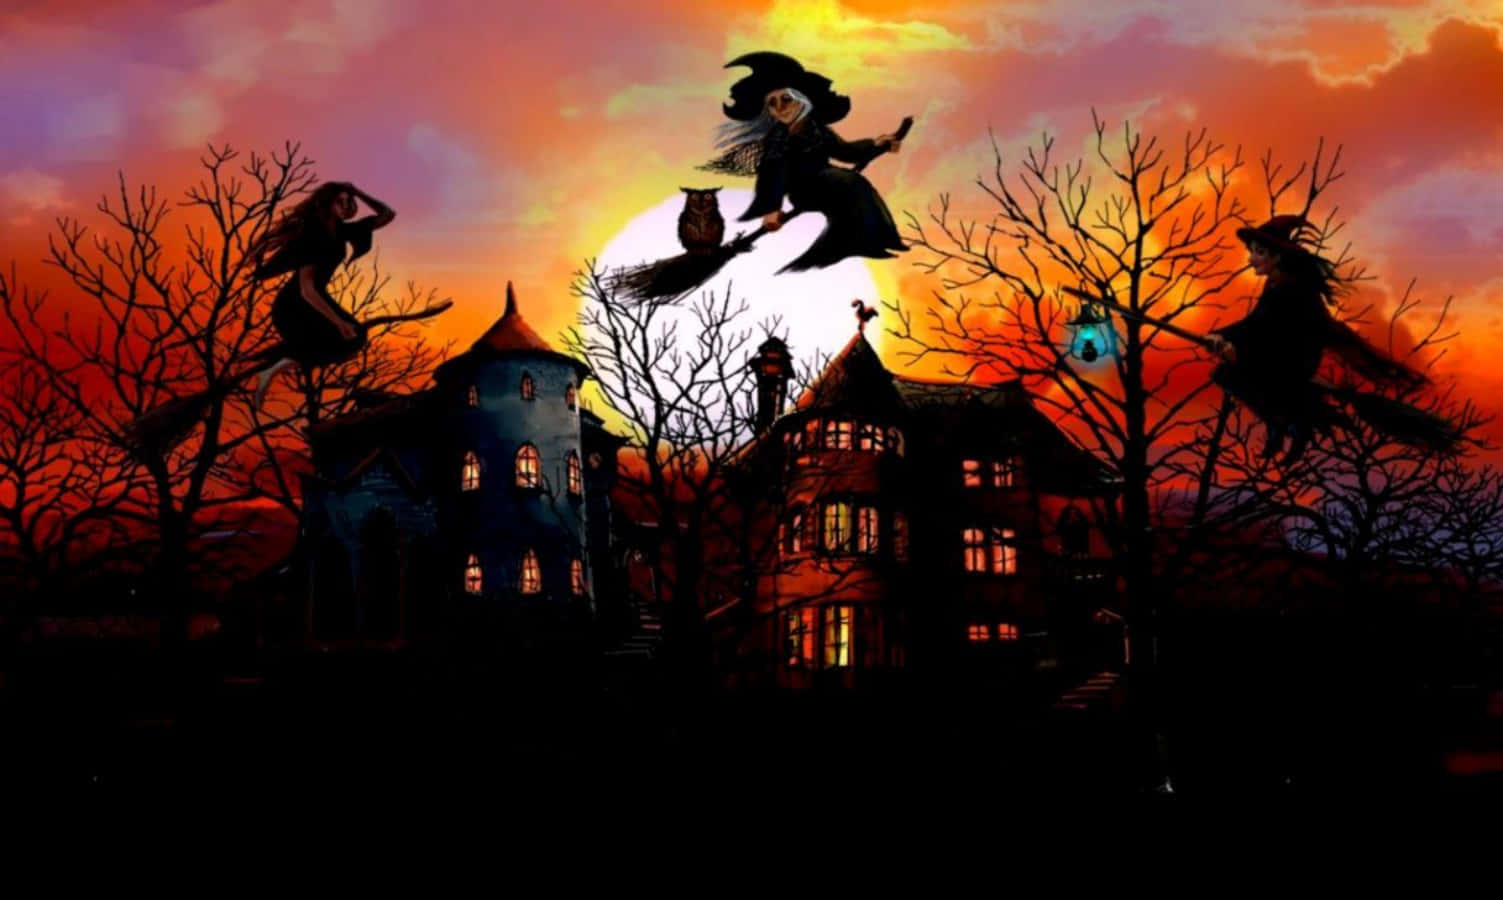 HD wallpaper halloween spooky scary creepy woman witch witchcraft   Wallpaper Flare